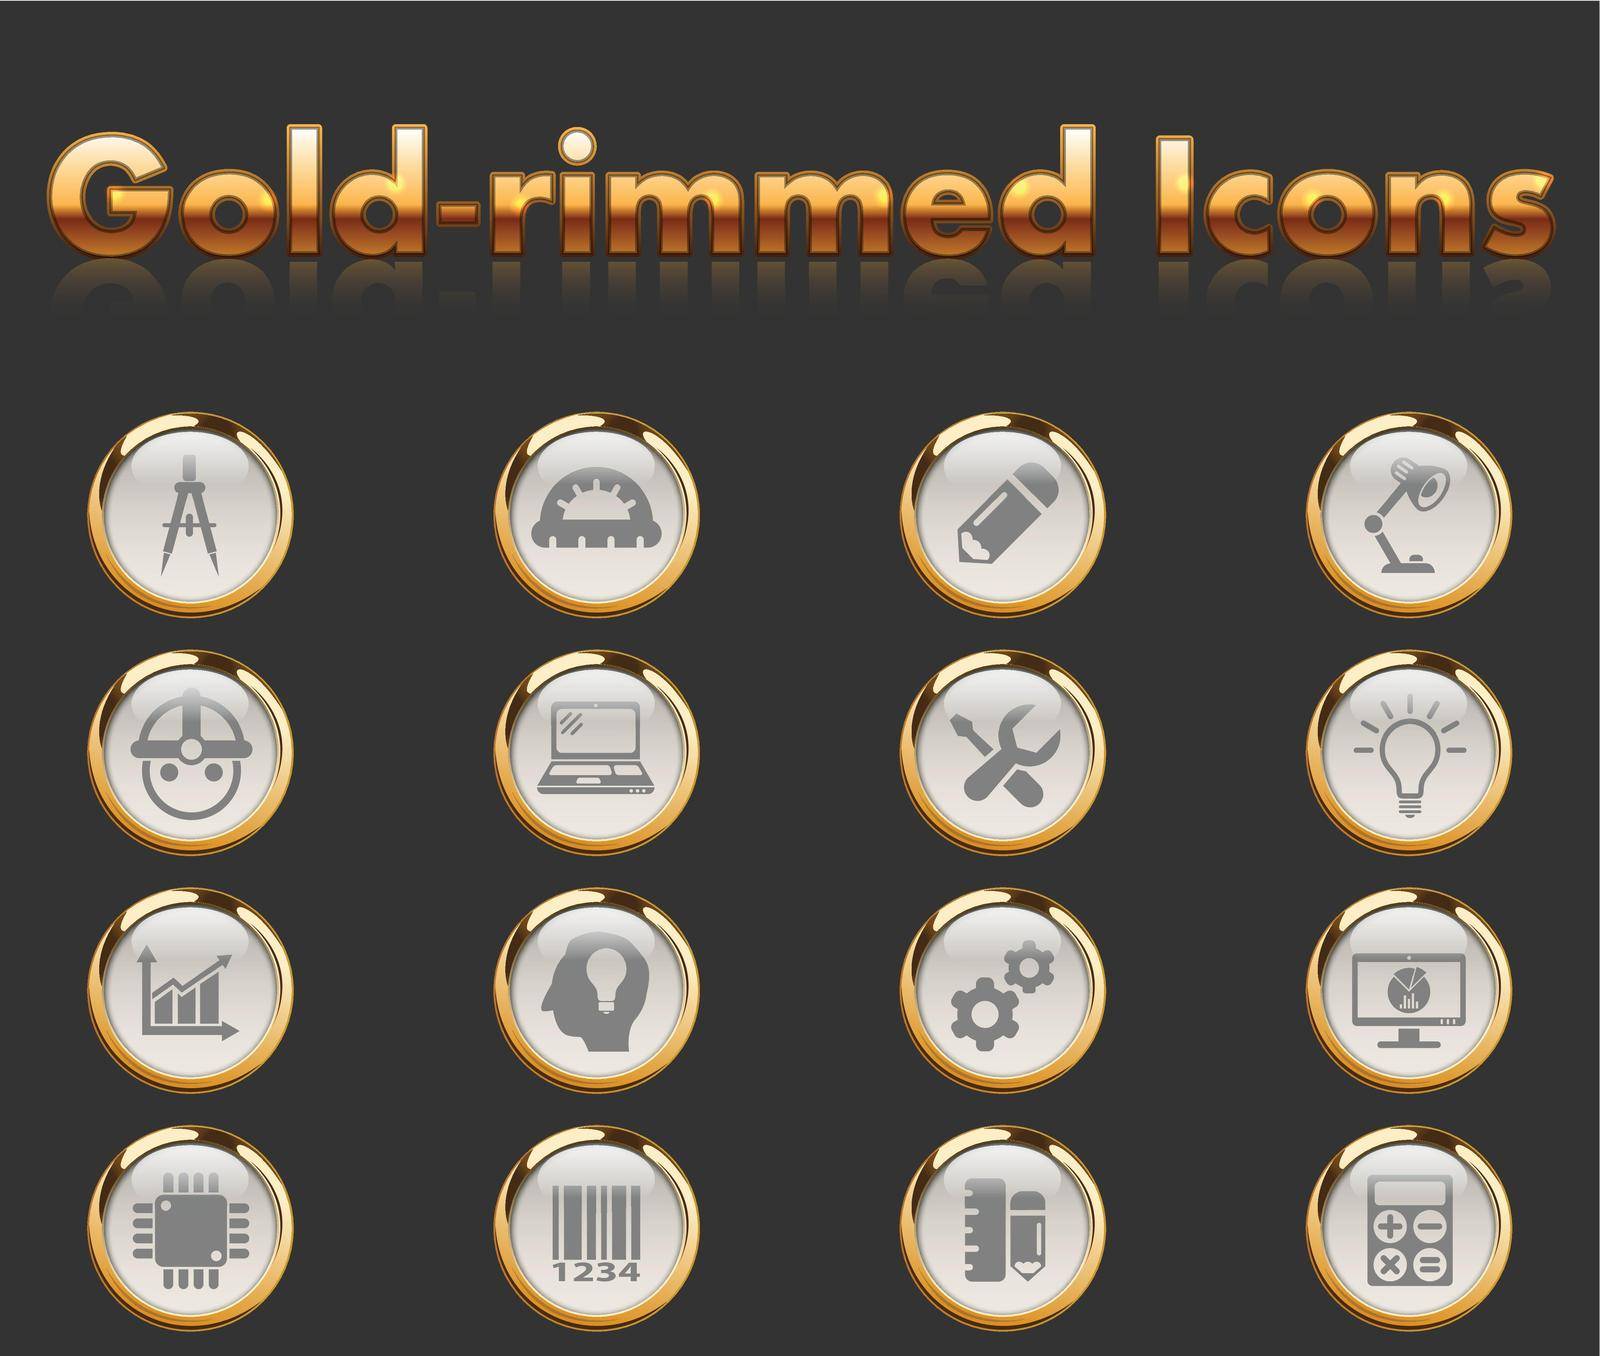 engineering gold-rimmed icons for your creative ideas